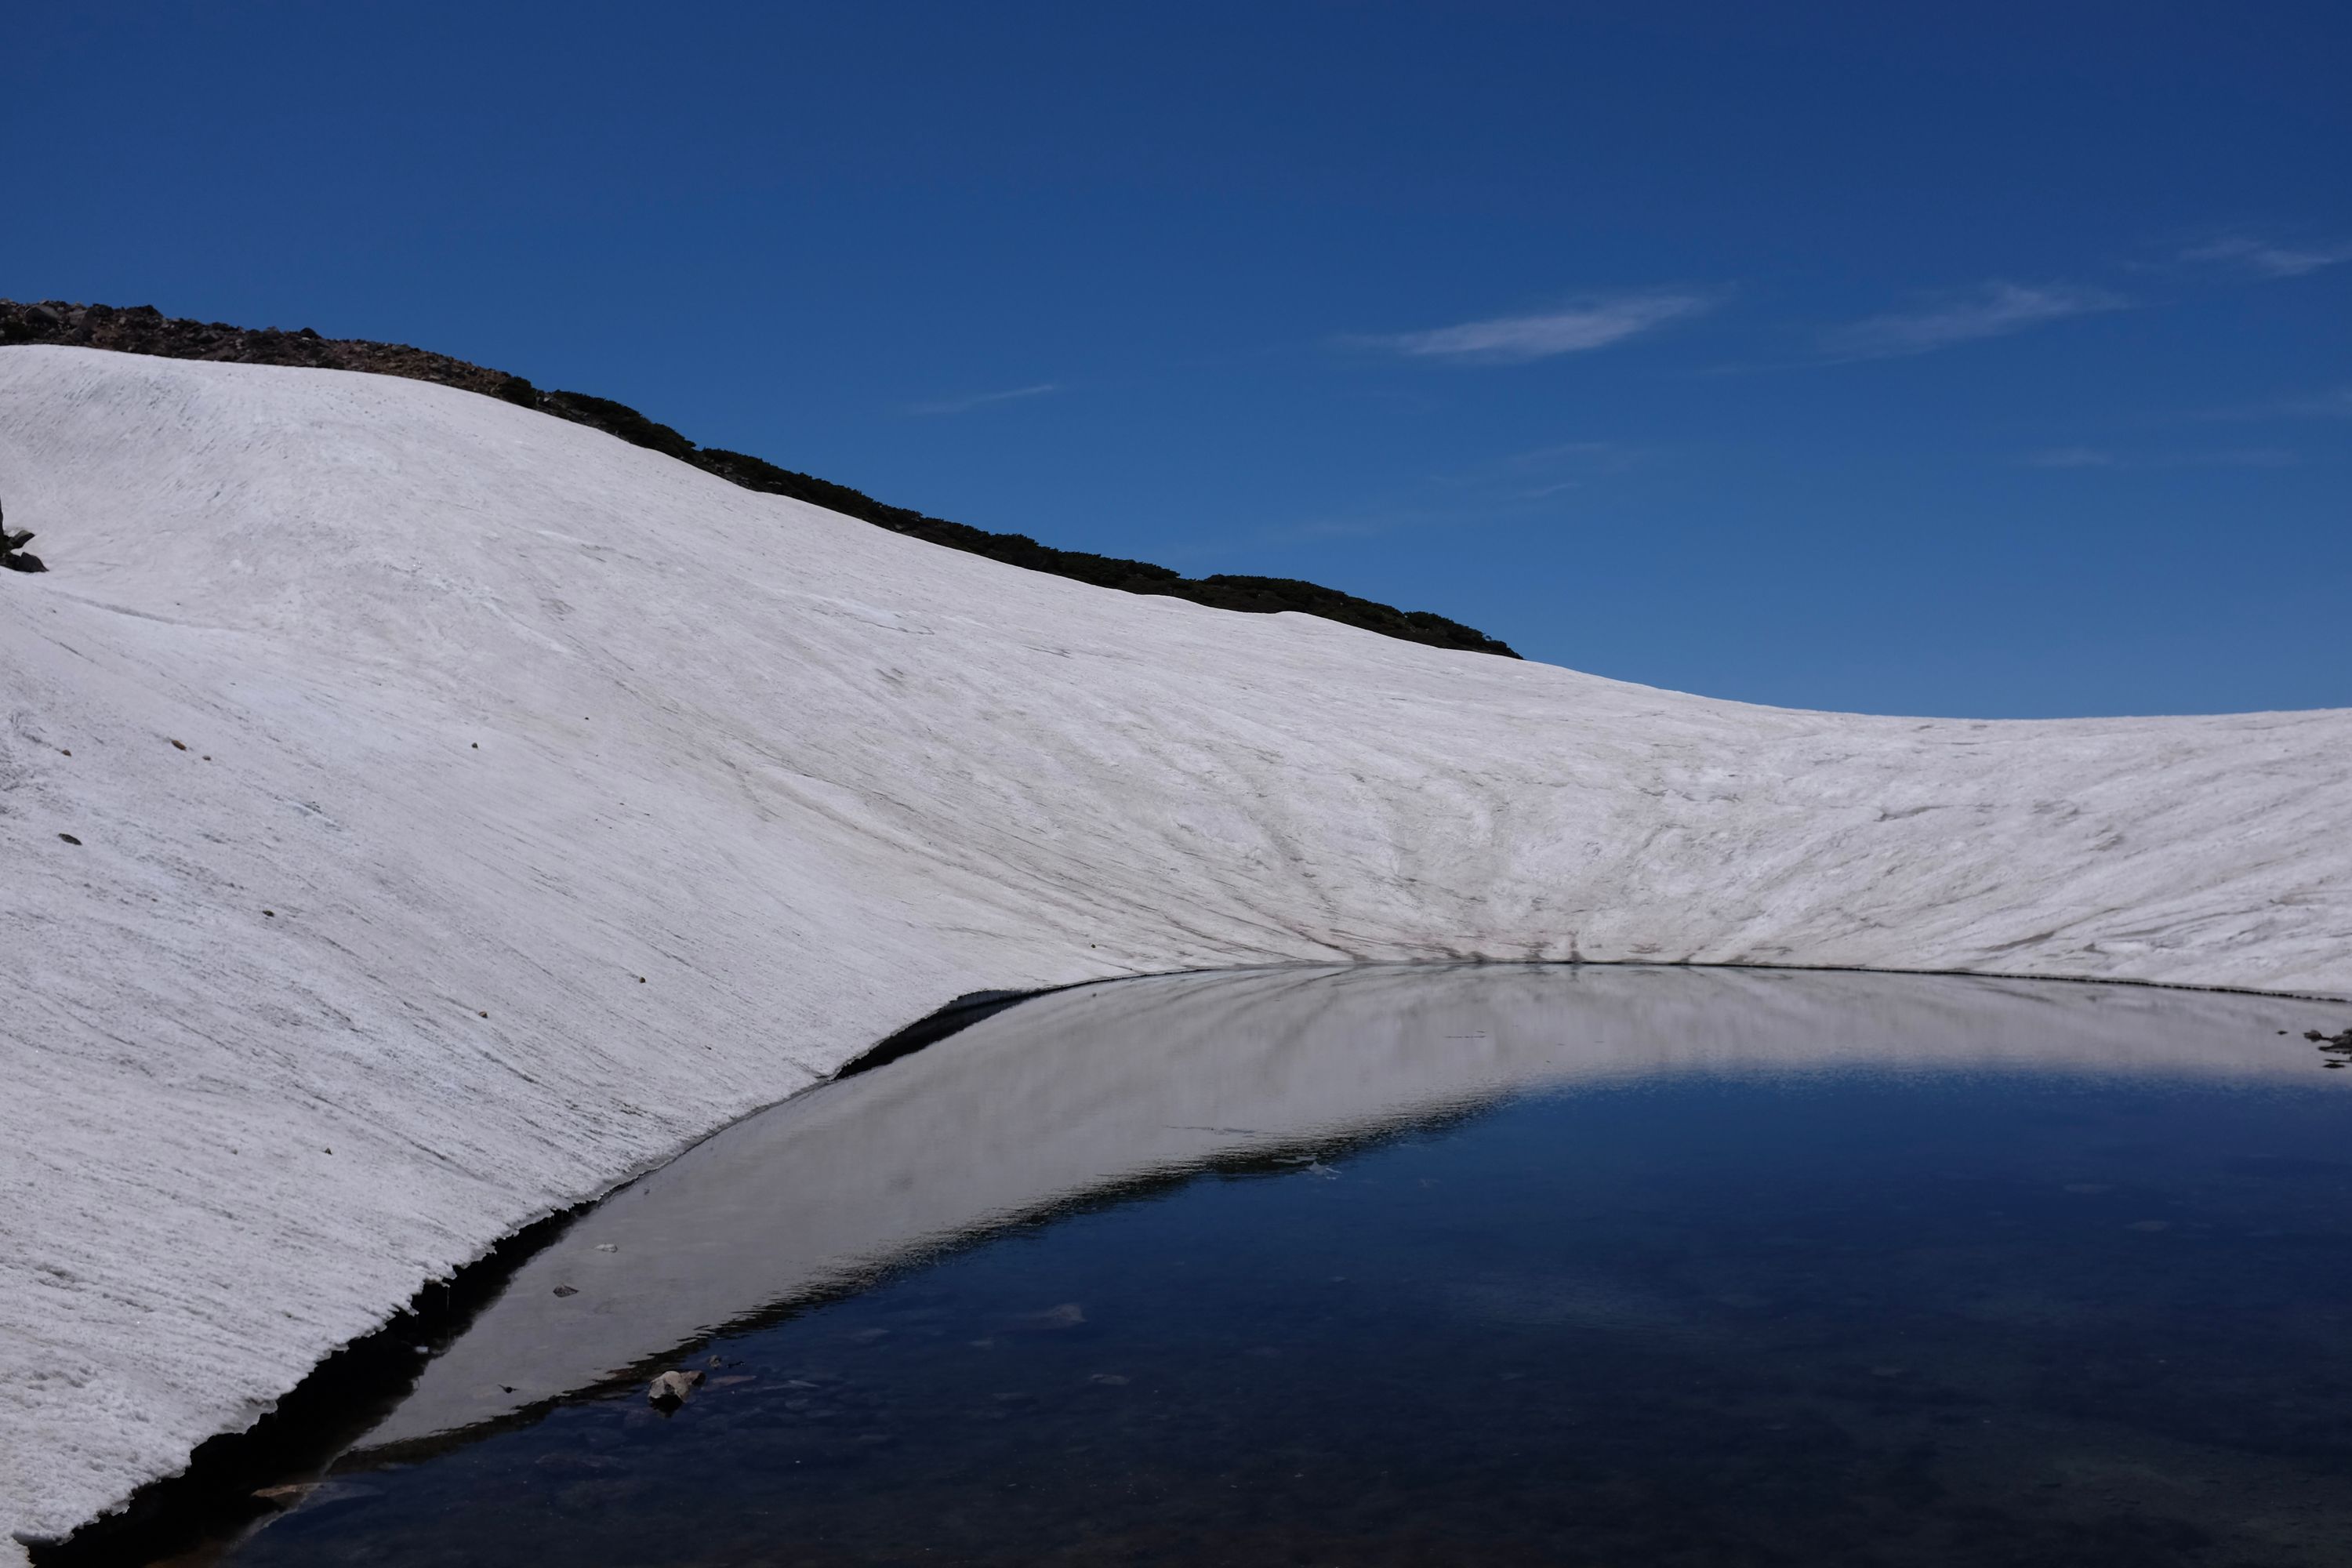 One of the small crater lakes immediately below the Gozengamine summit of Hakusan, its sides completely covered in snow.